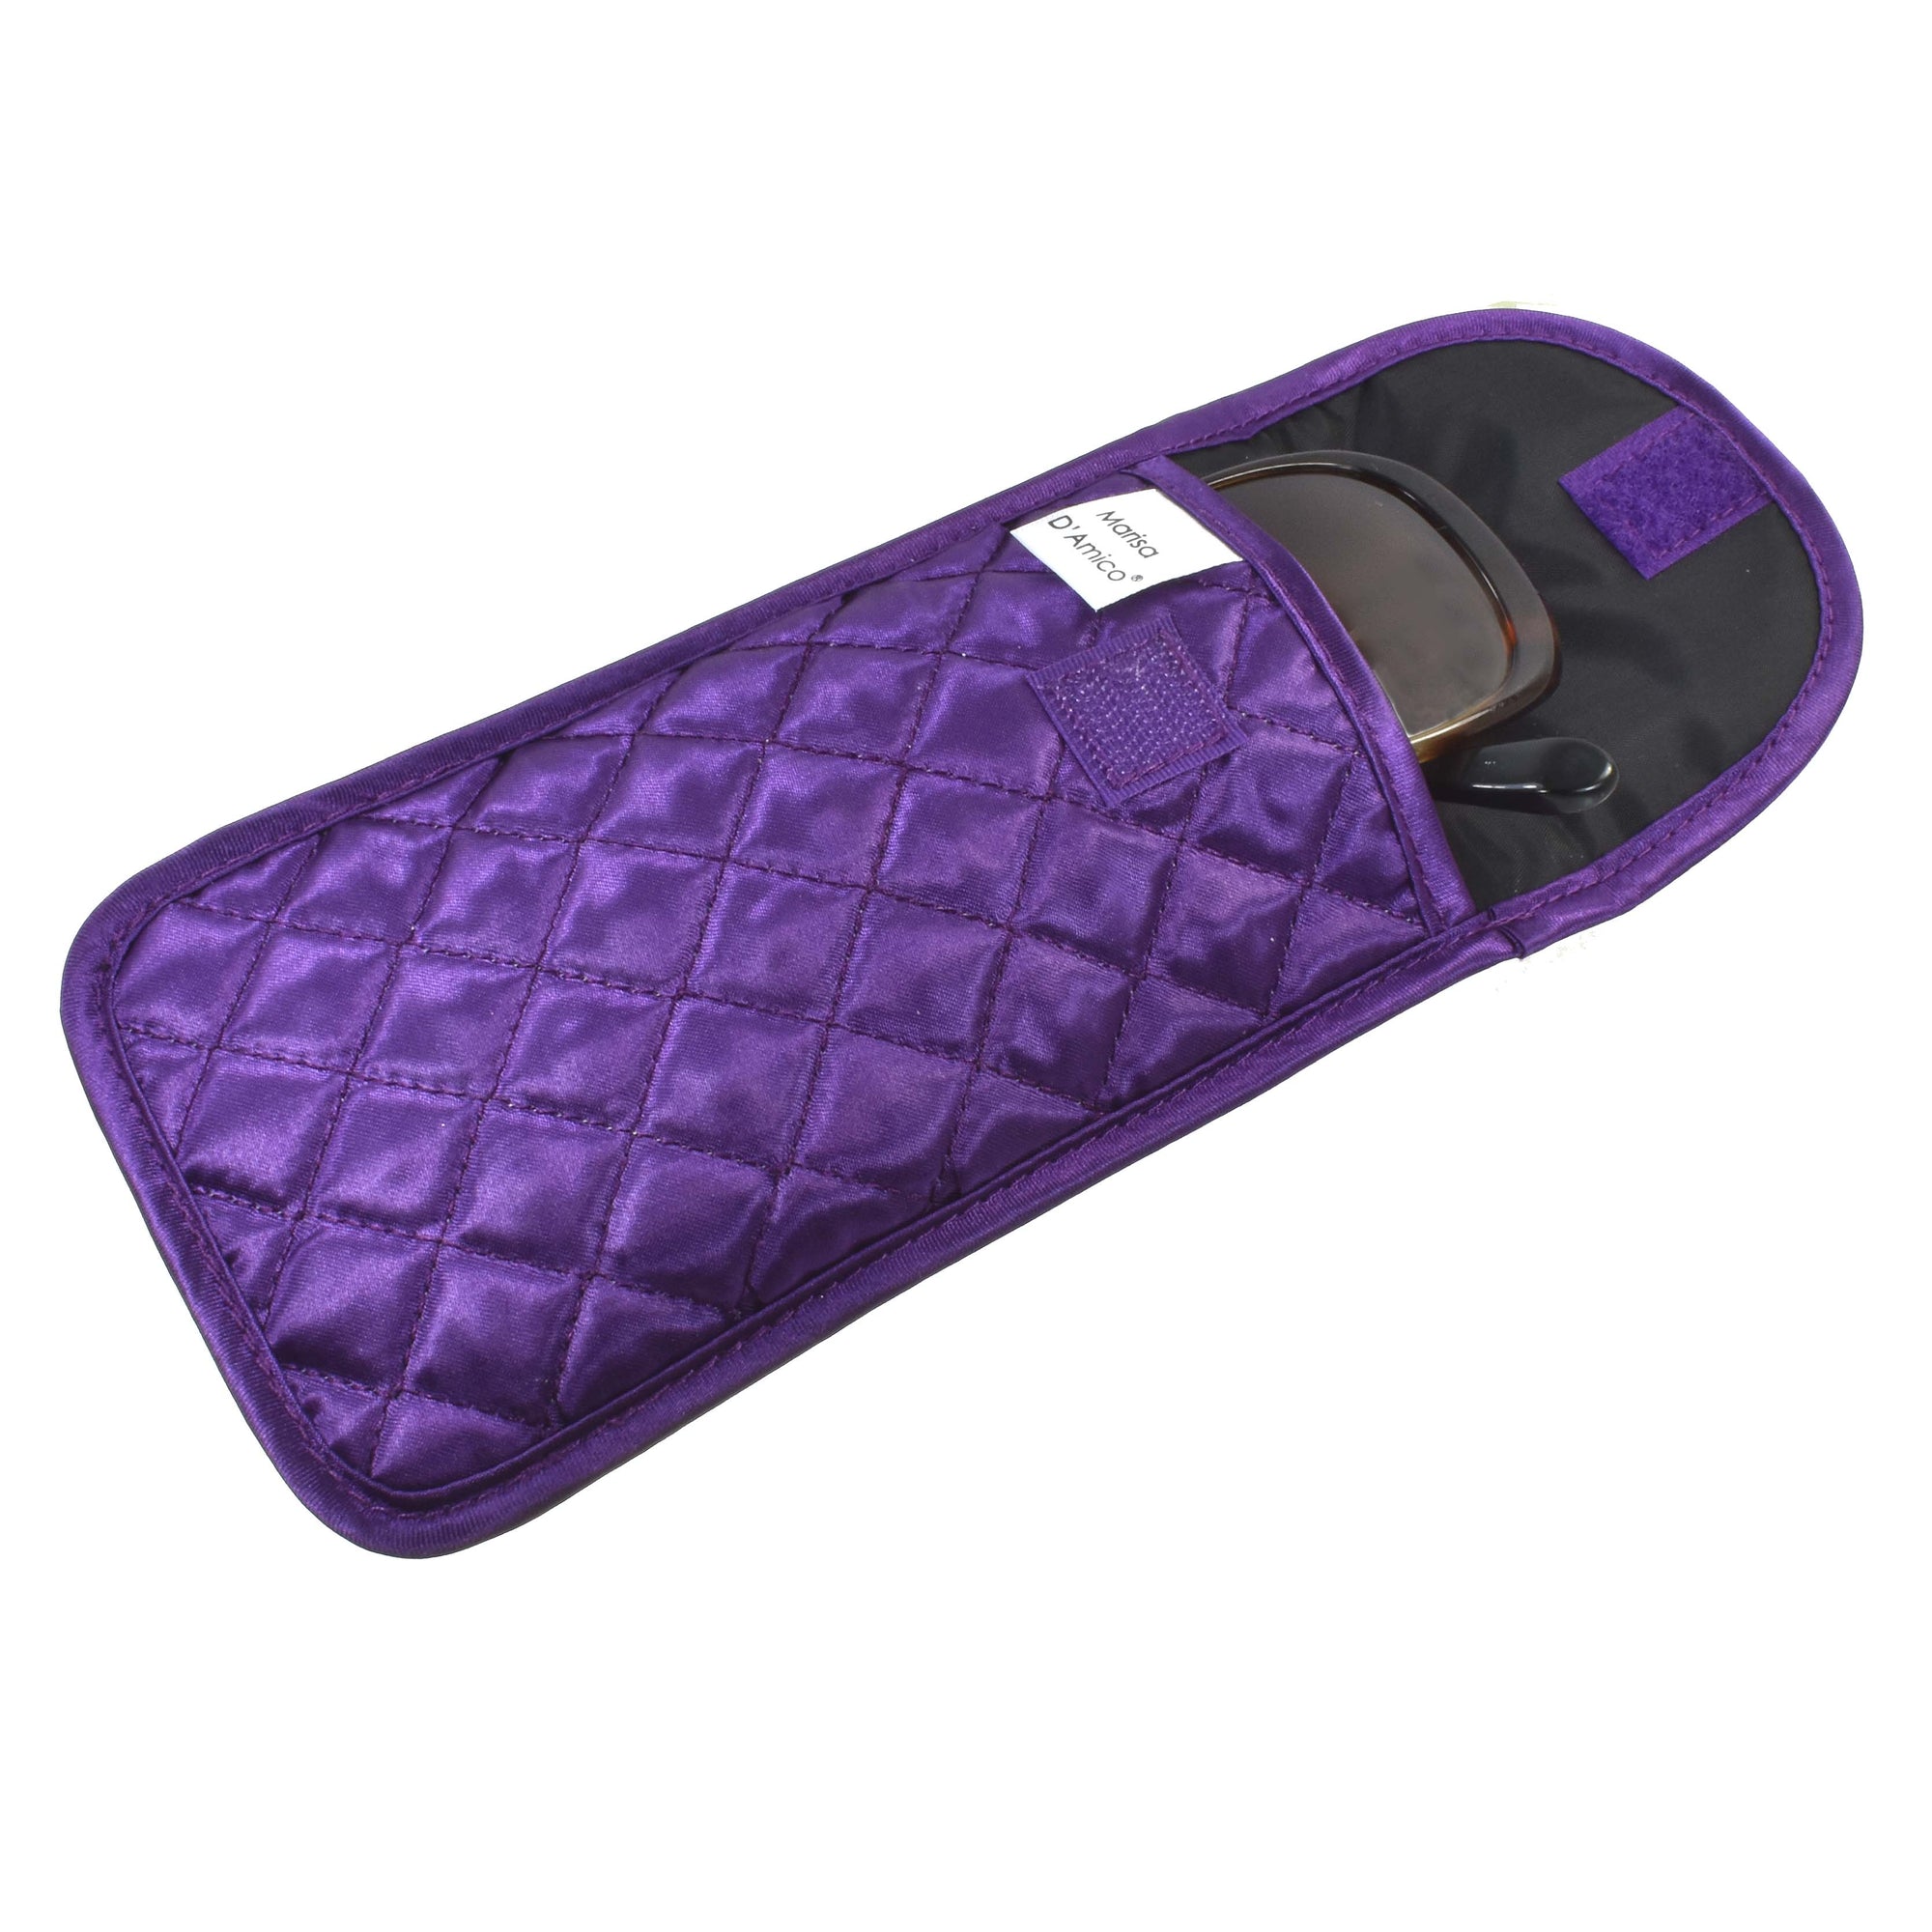 Quilted Satin Soft Eyeglass Pouch with Velcro Flap Closure in Purple, Open View